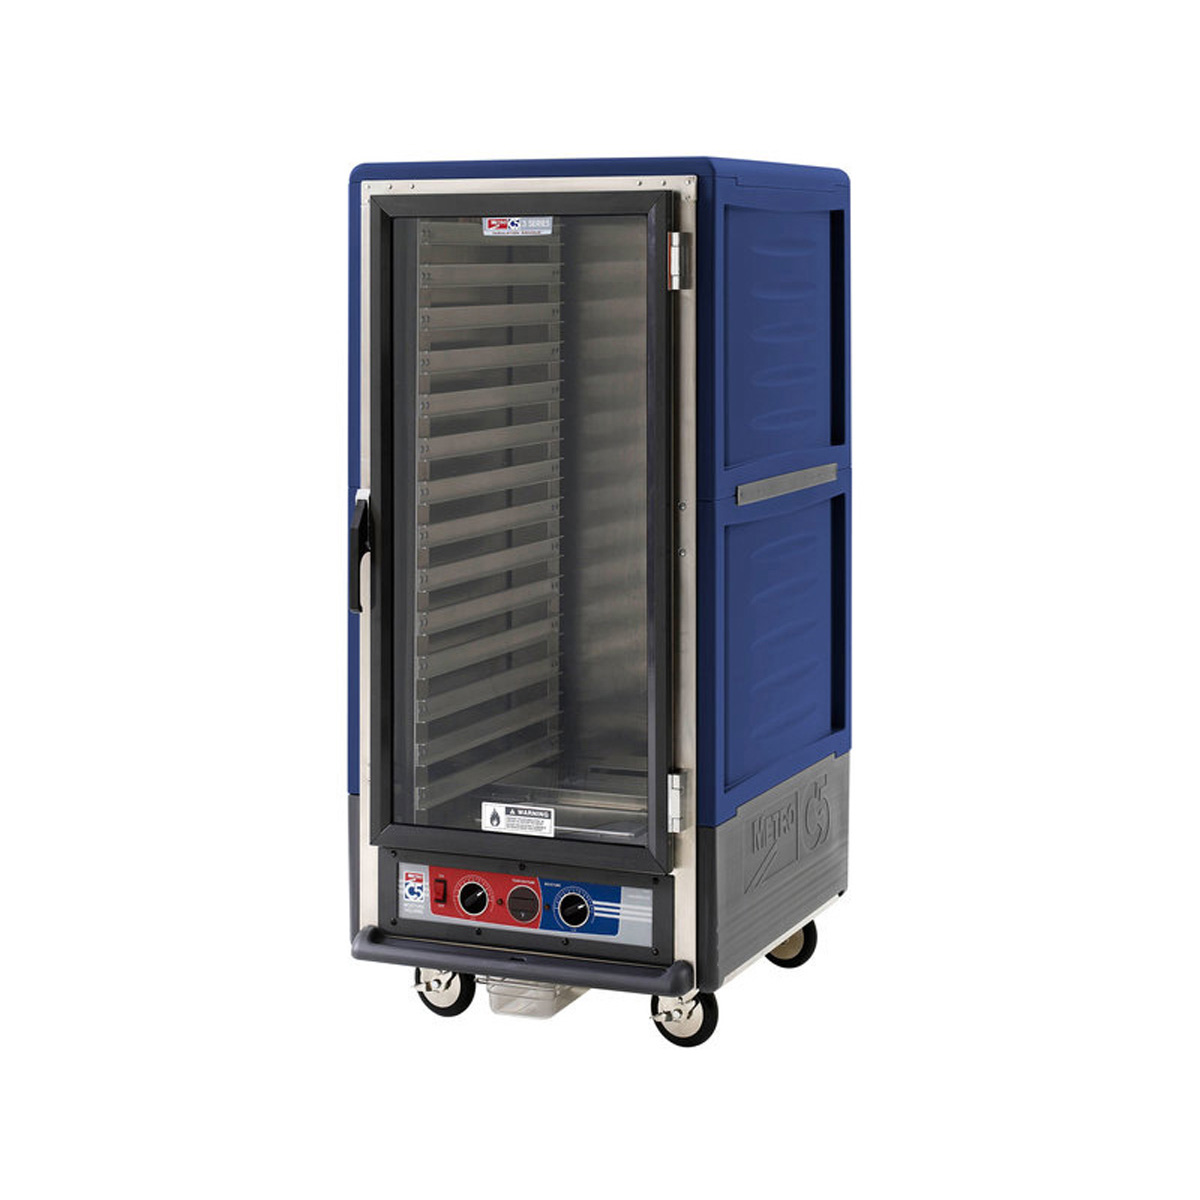 Metro C537-MFC-L-BUA C5 3 Series Insulated Mobile Proofing and Holding Cabinet